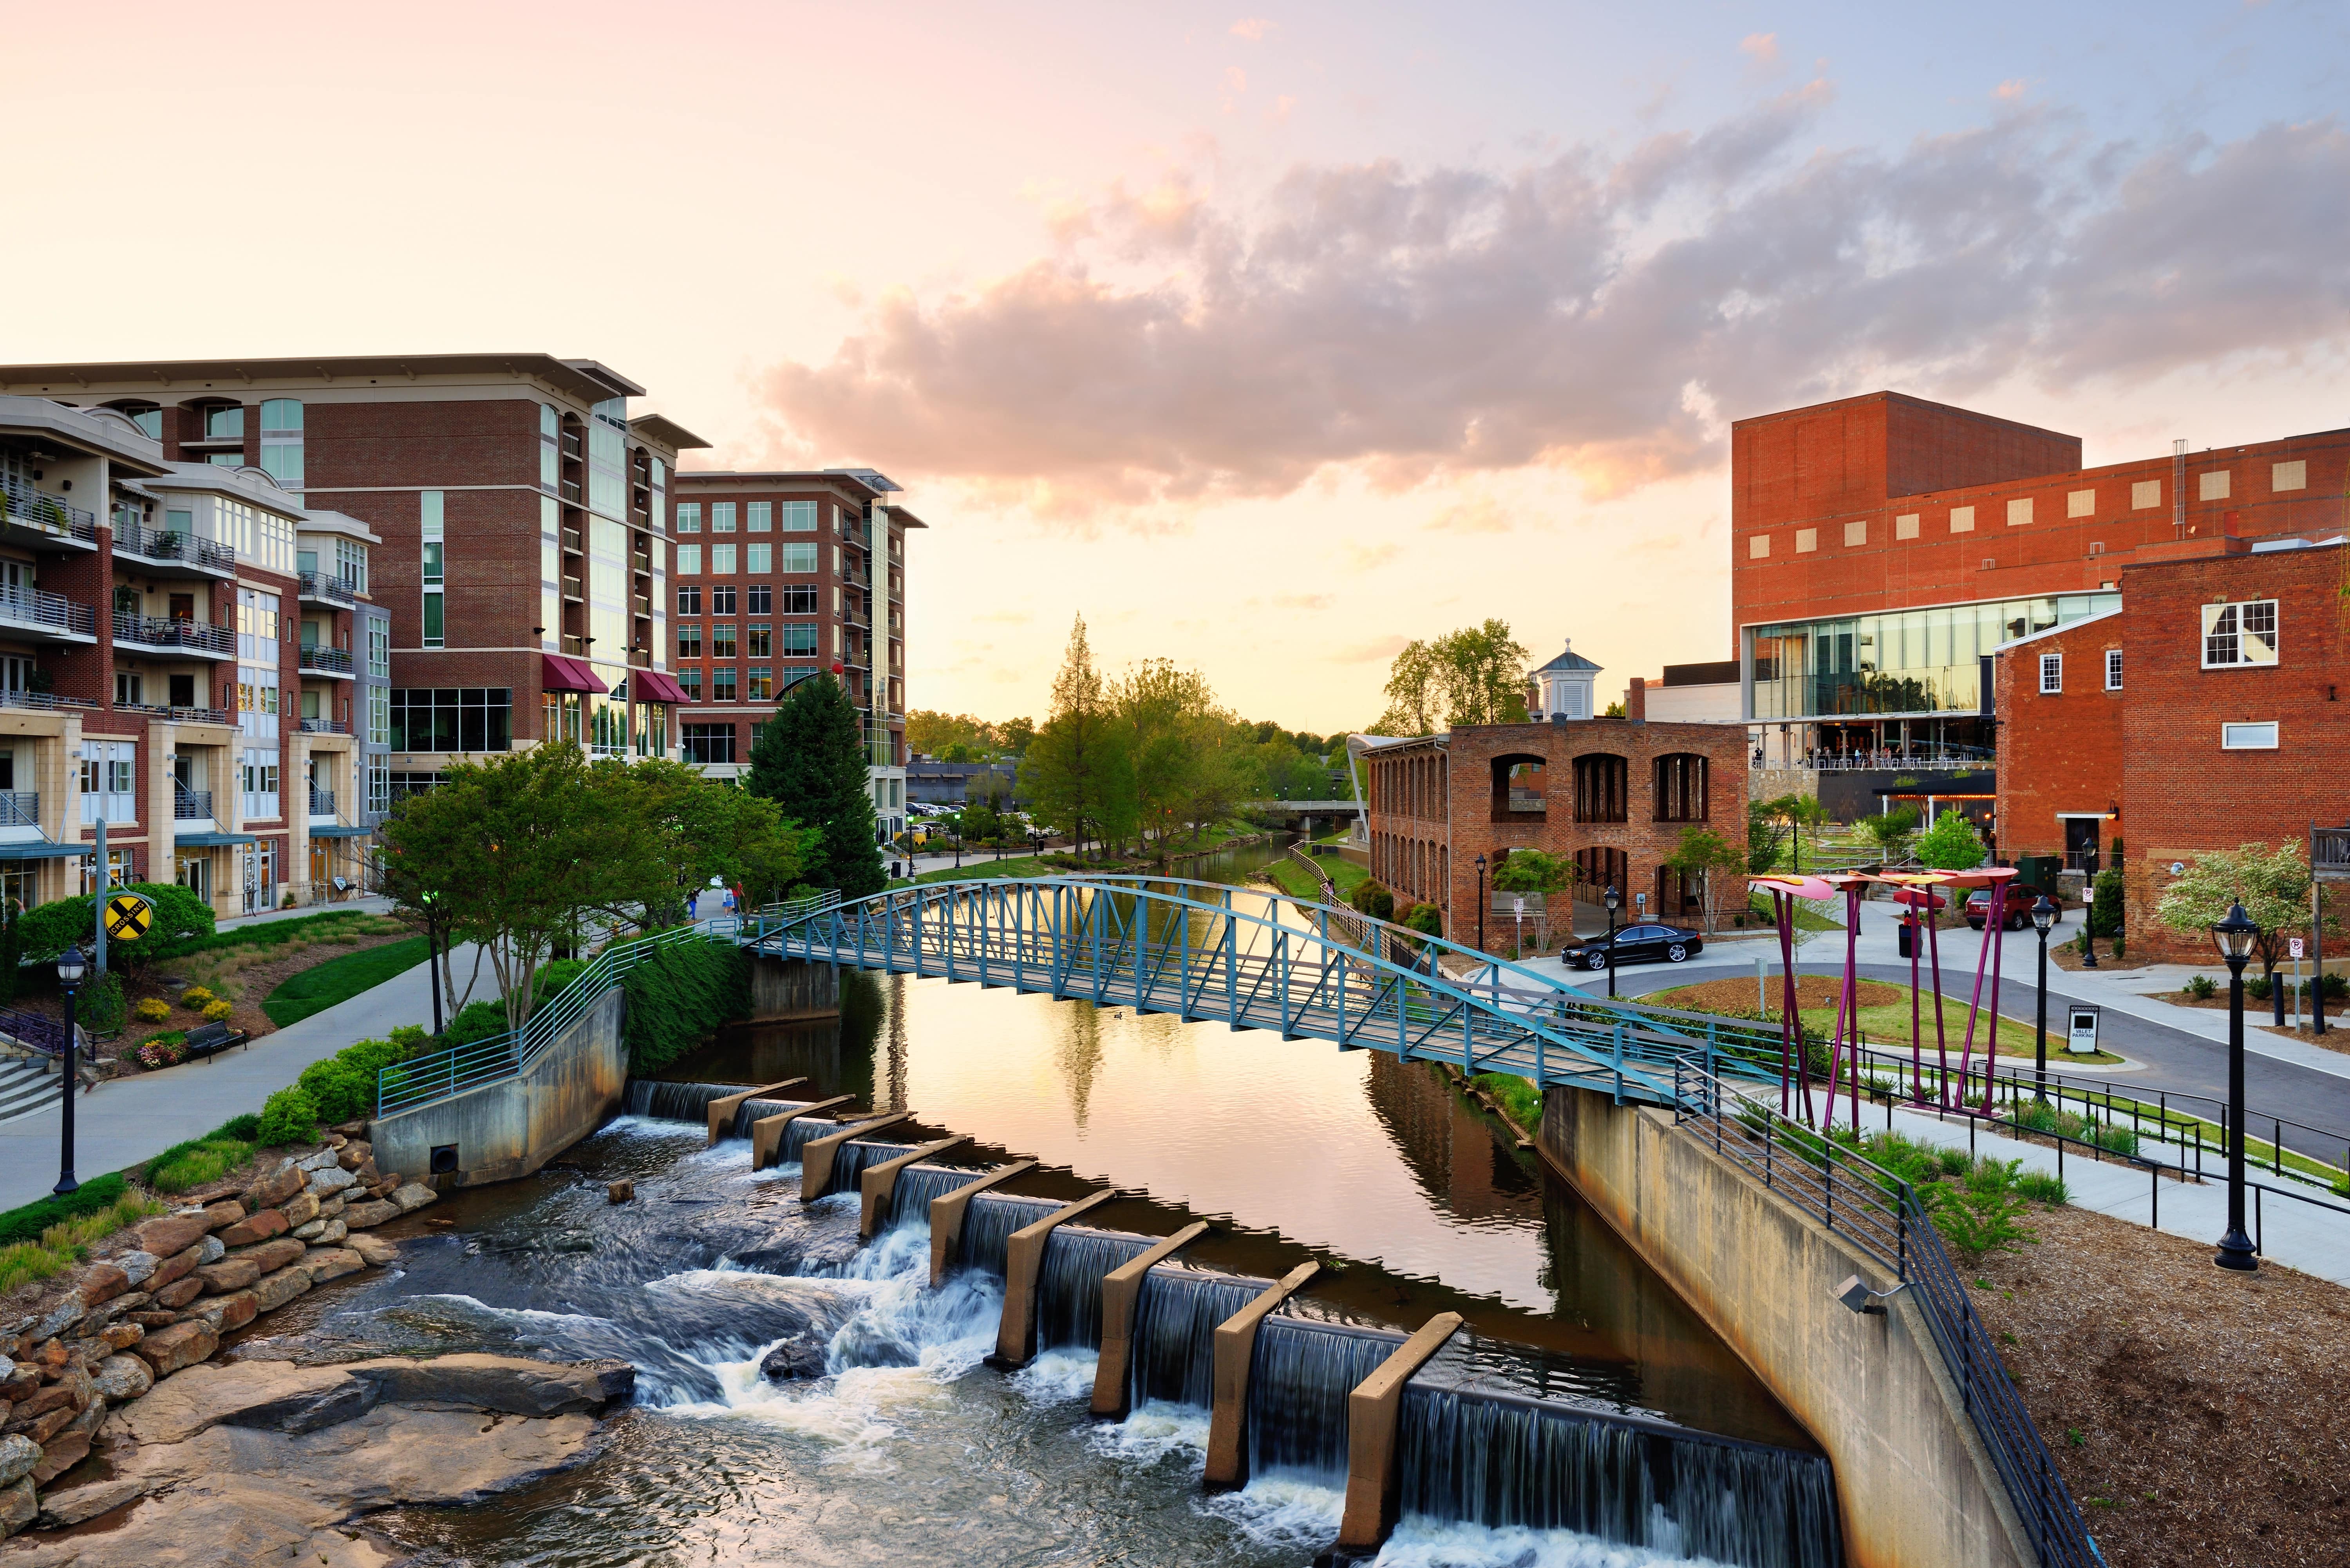 Downtown Greenville SC at sunset